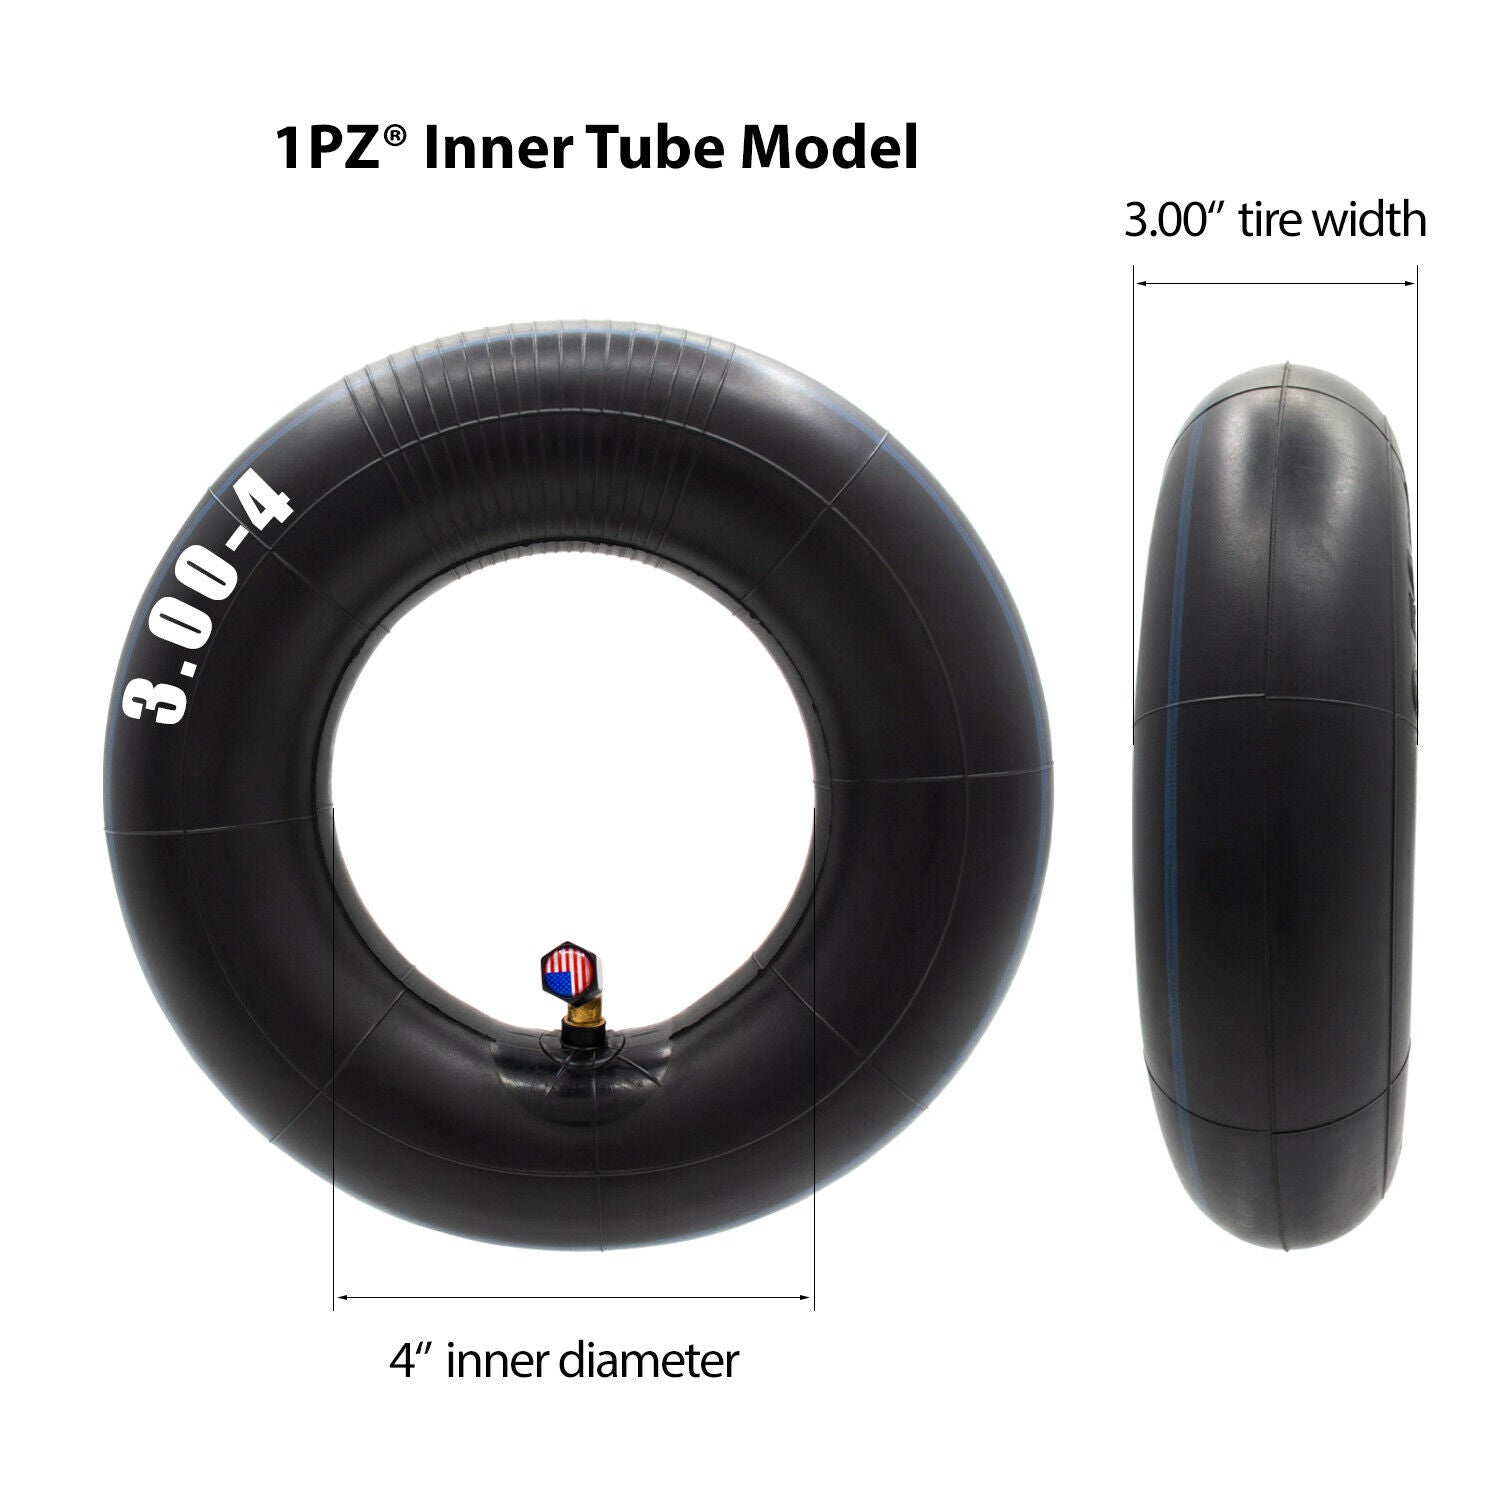 1PZ Heavy Duty 3.00-4 Inner Tube with TR87 bent Valve for Razor E300 E325 Scooter ATV Wheelbarrows Tractors Mowers Utility Dolly Hand Truck Generator Cart Mobility Scooter